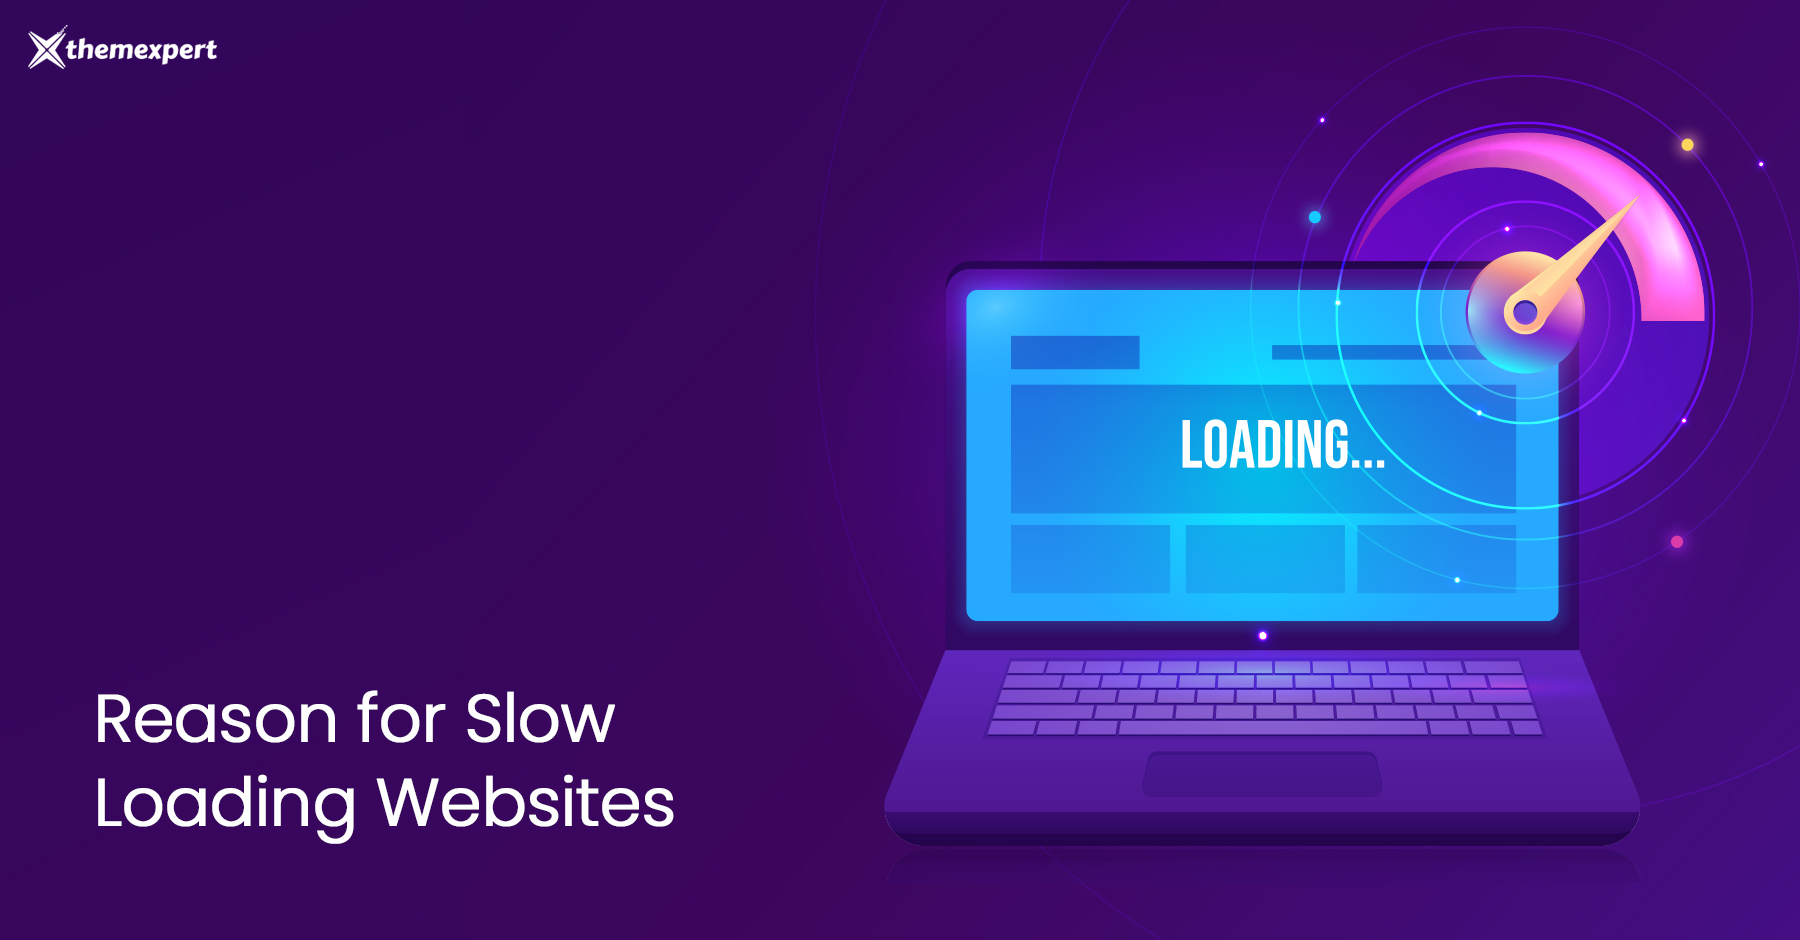 7 Reason for Slow Loading Websites and How to Fix it